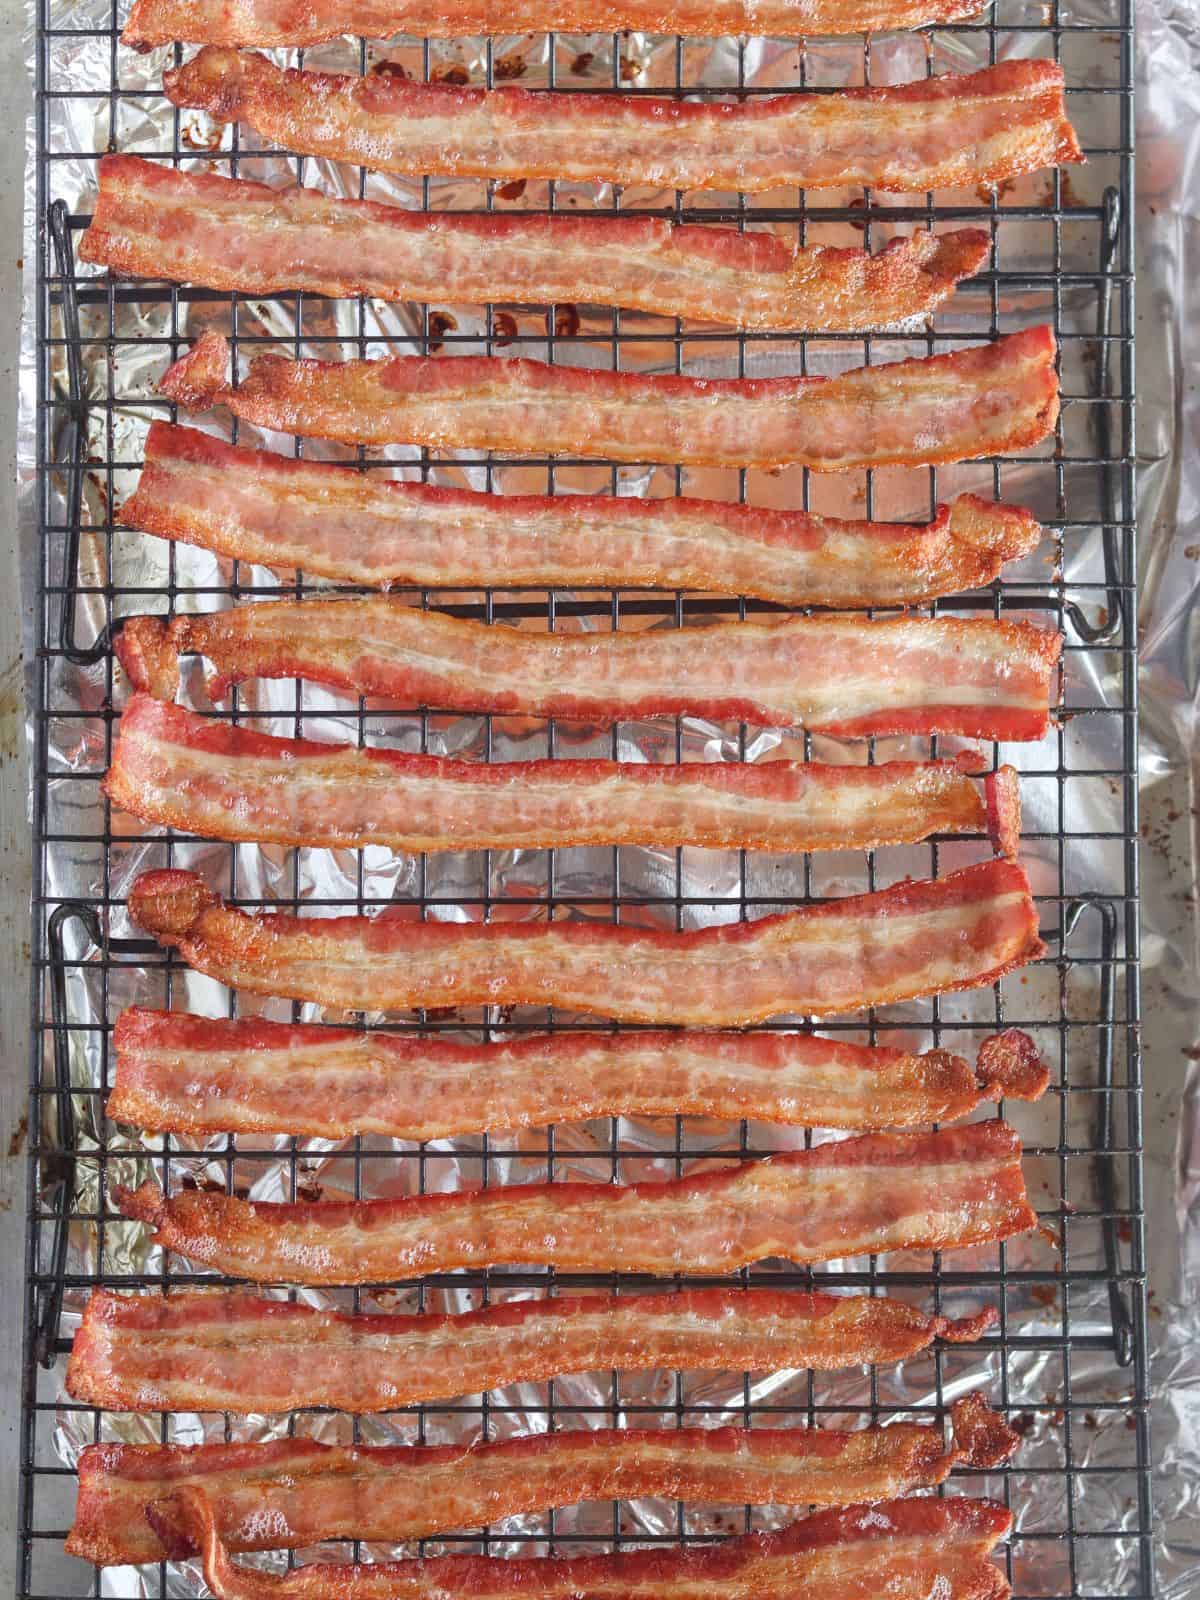 cooked bacon on a cooling rack inside a baking sheet.